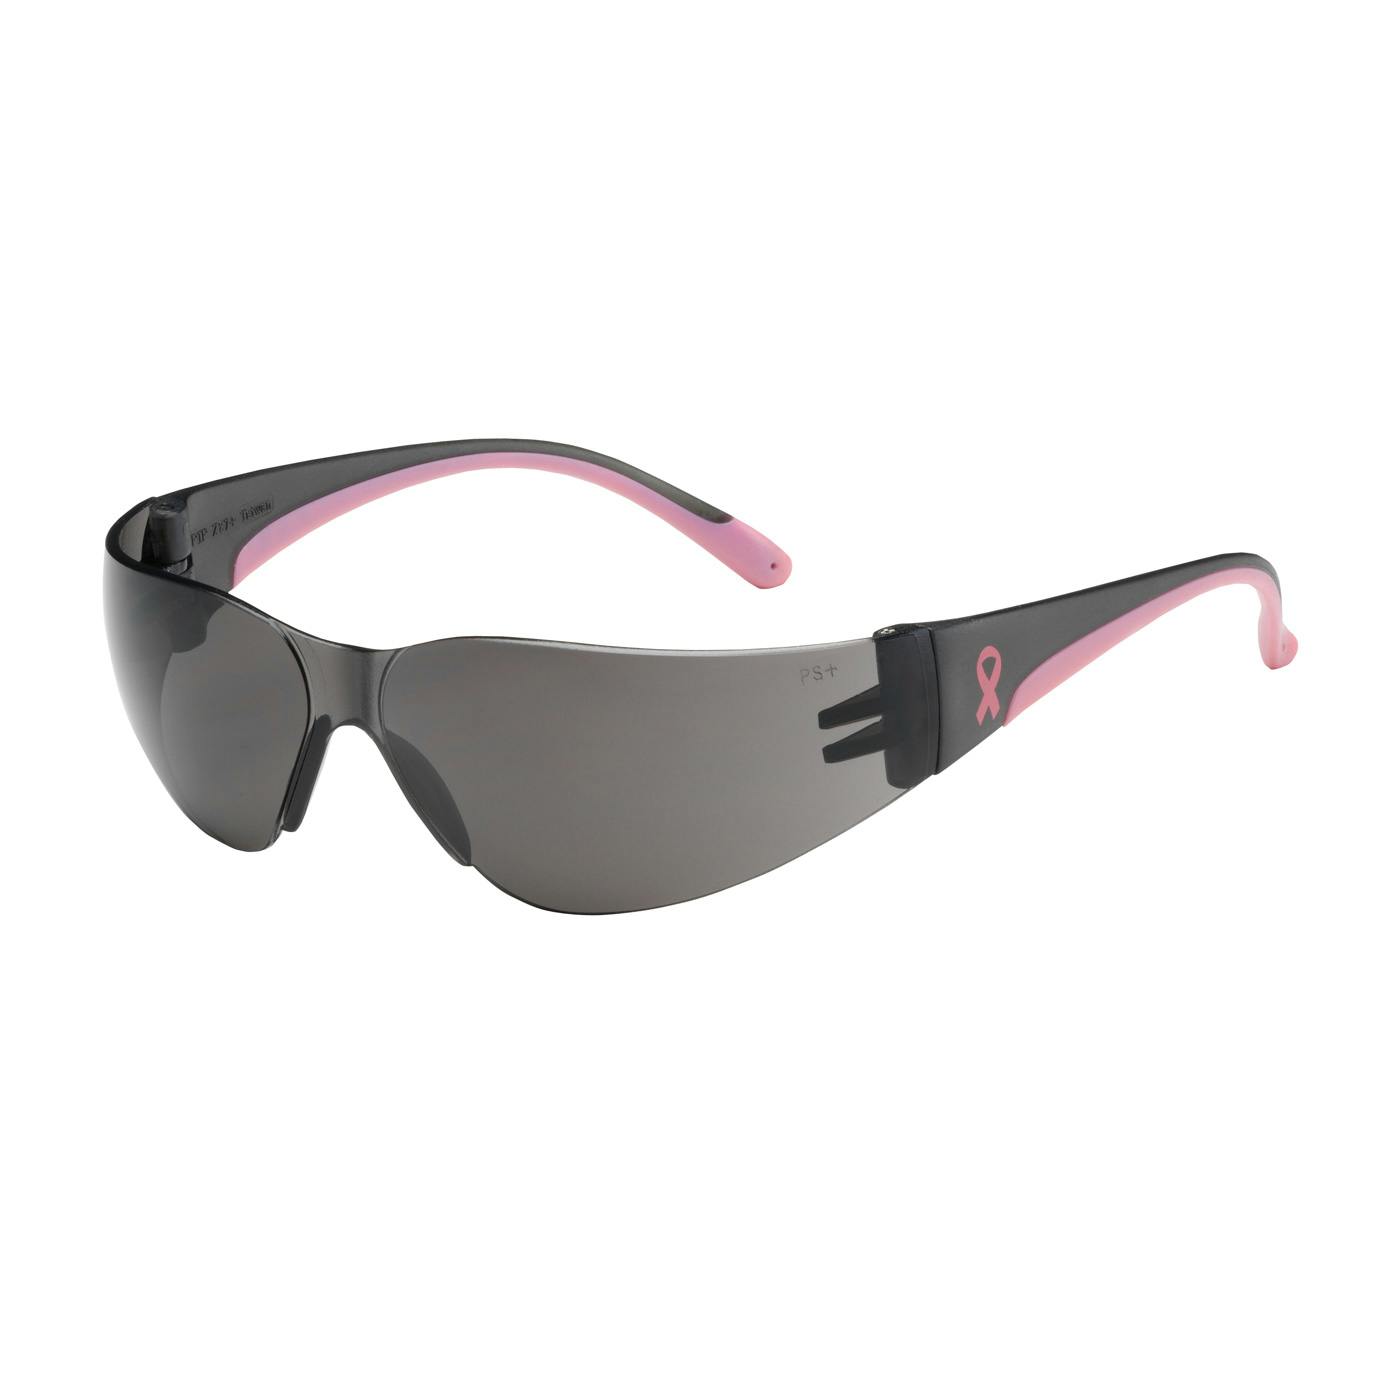 Rimless Safety Glasses with Gray / Pink Temple, Gray Lens and Anti-Scratch Coating, Pink (250-11-5501) - OS